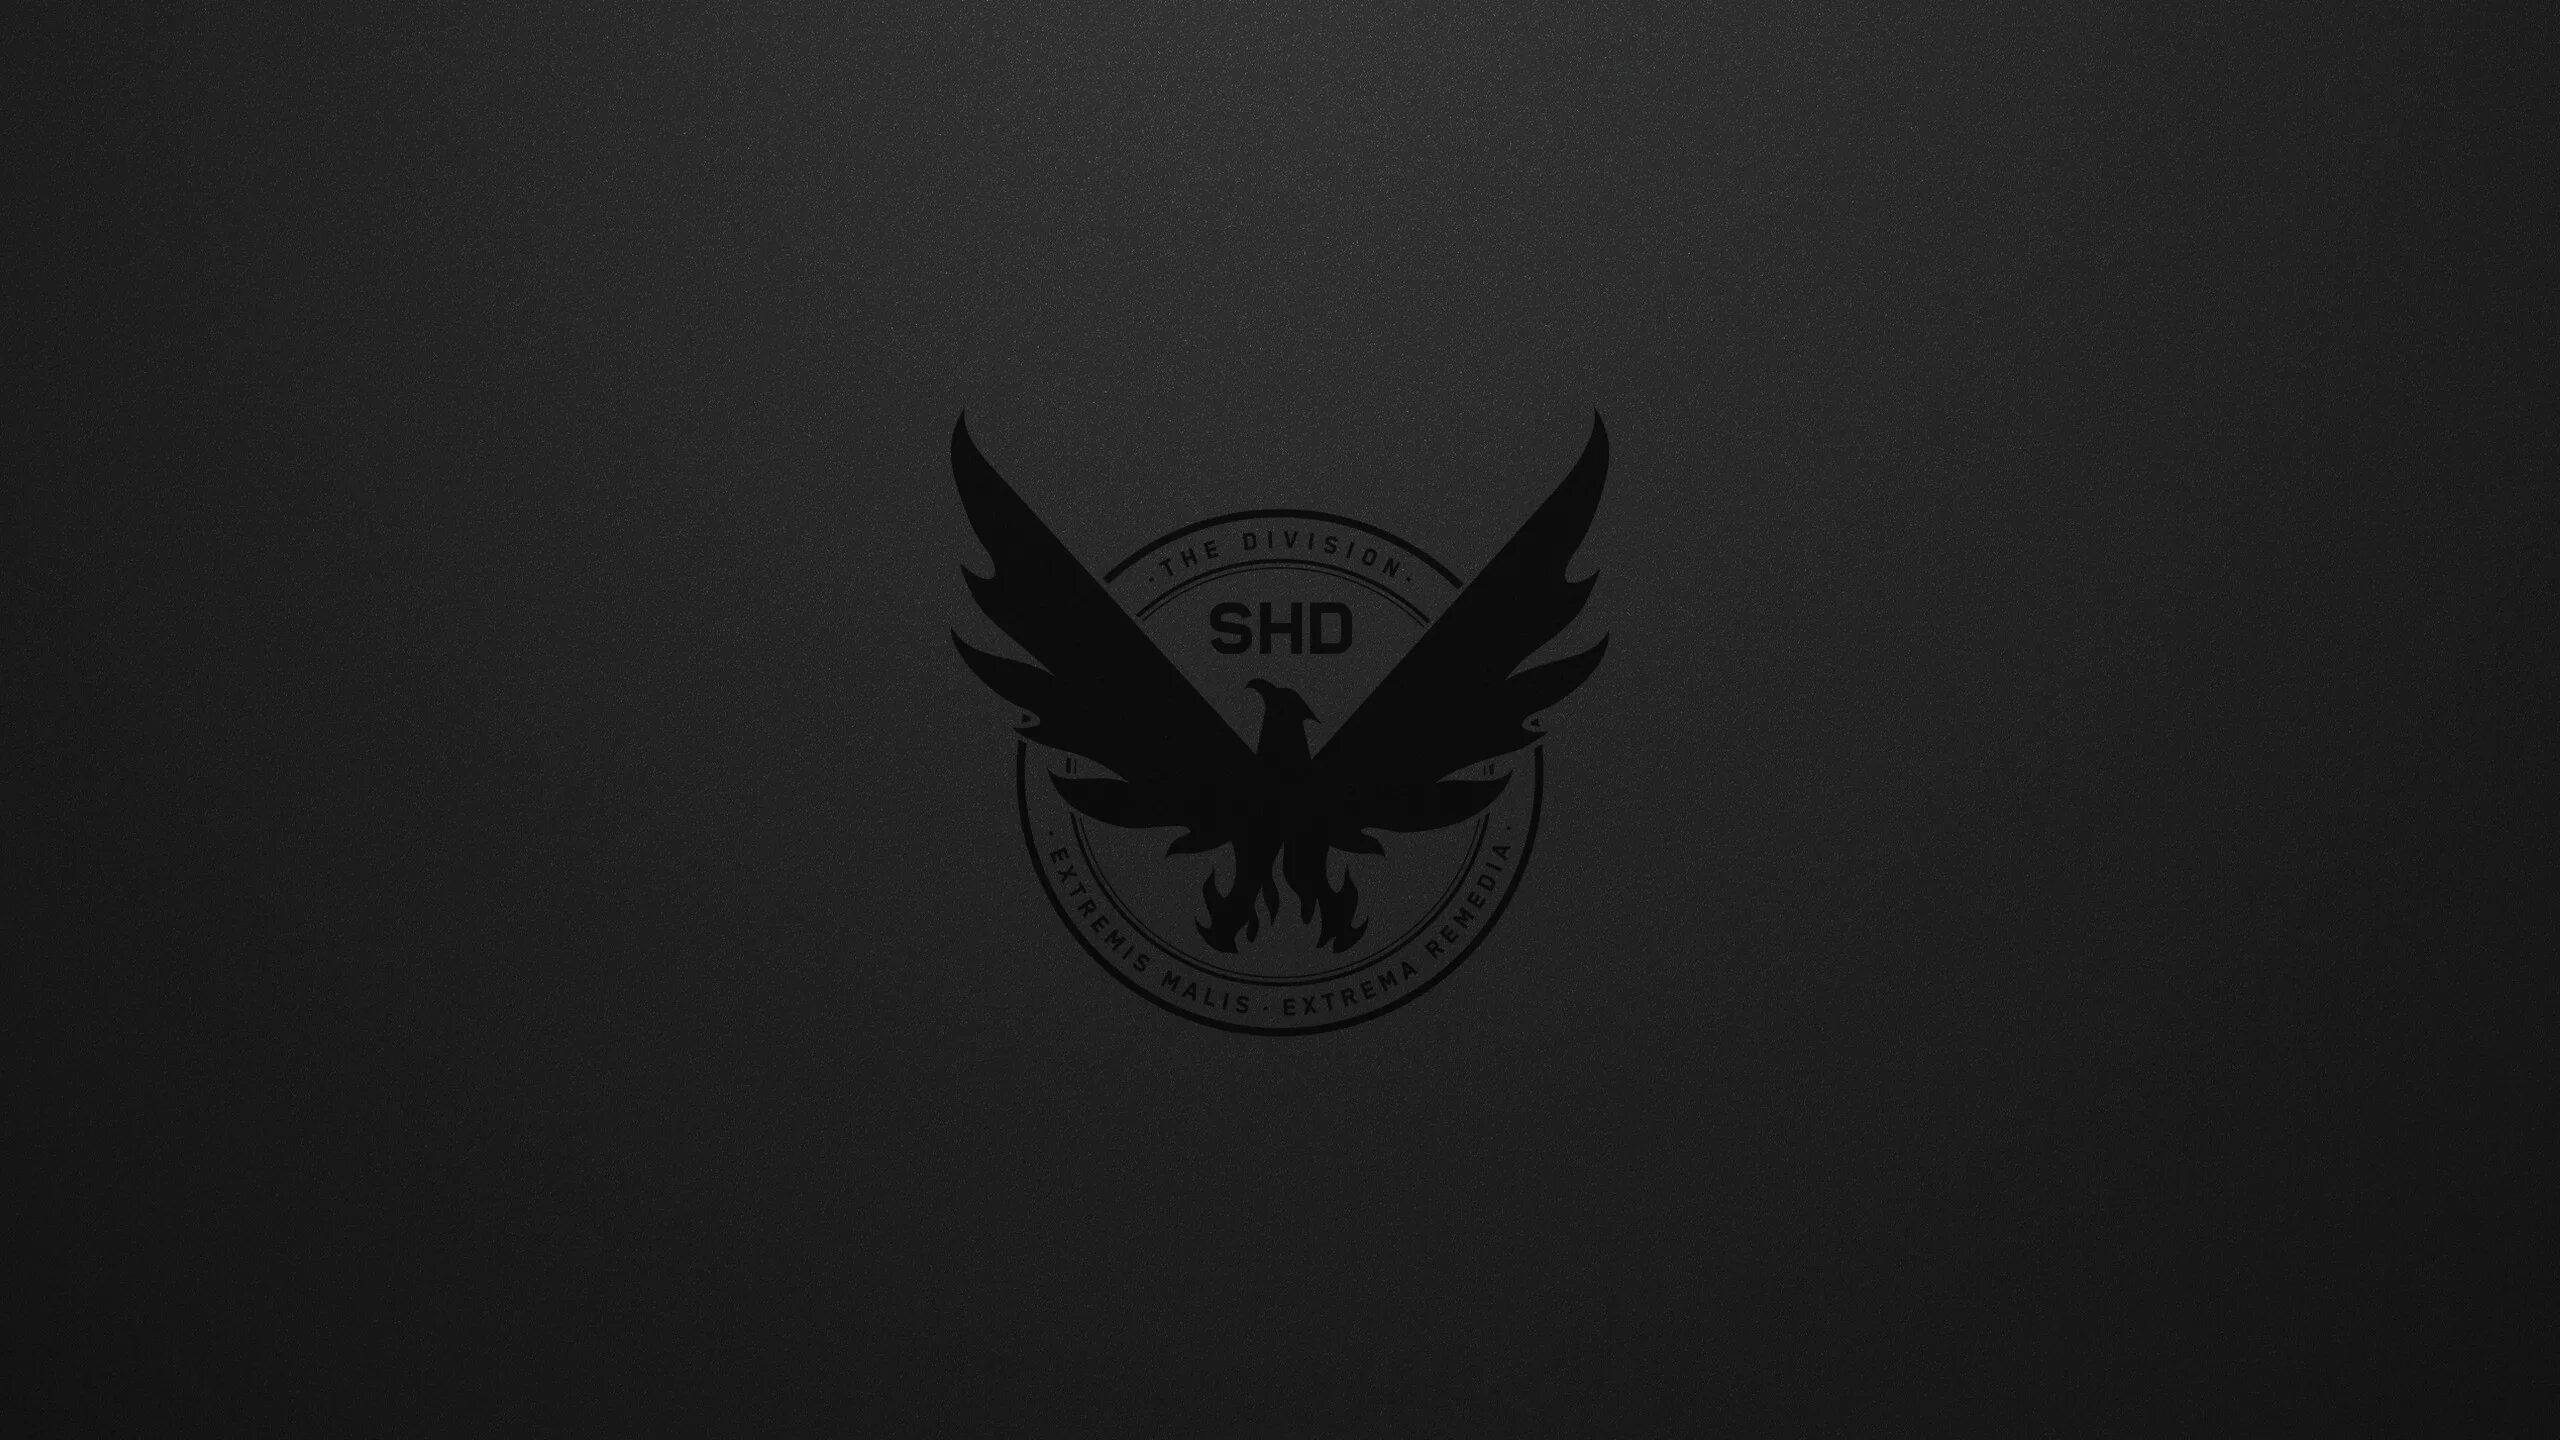 21 9. Tom Clancy's the Division 2 обои. The Division 2 Wallpaper. Обои 2к на рабочий стол. The Division 2 обои 1920 1080.